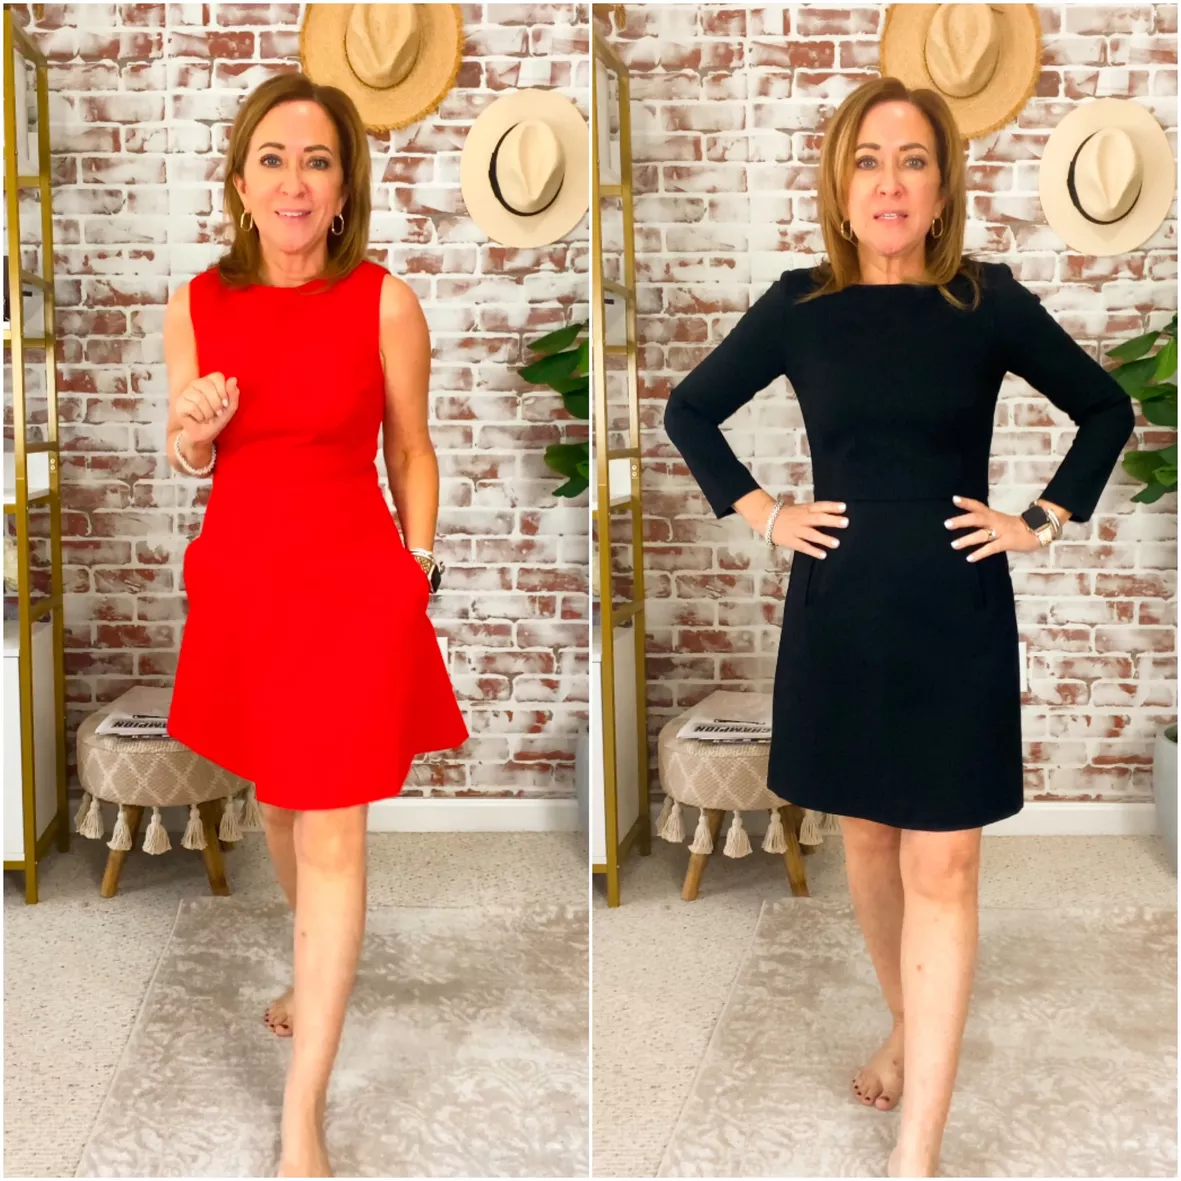 The Perfect Fit & Flare Dress